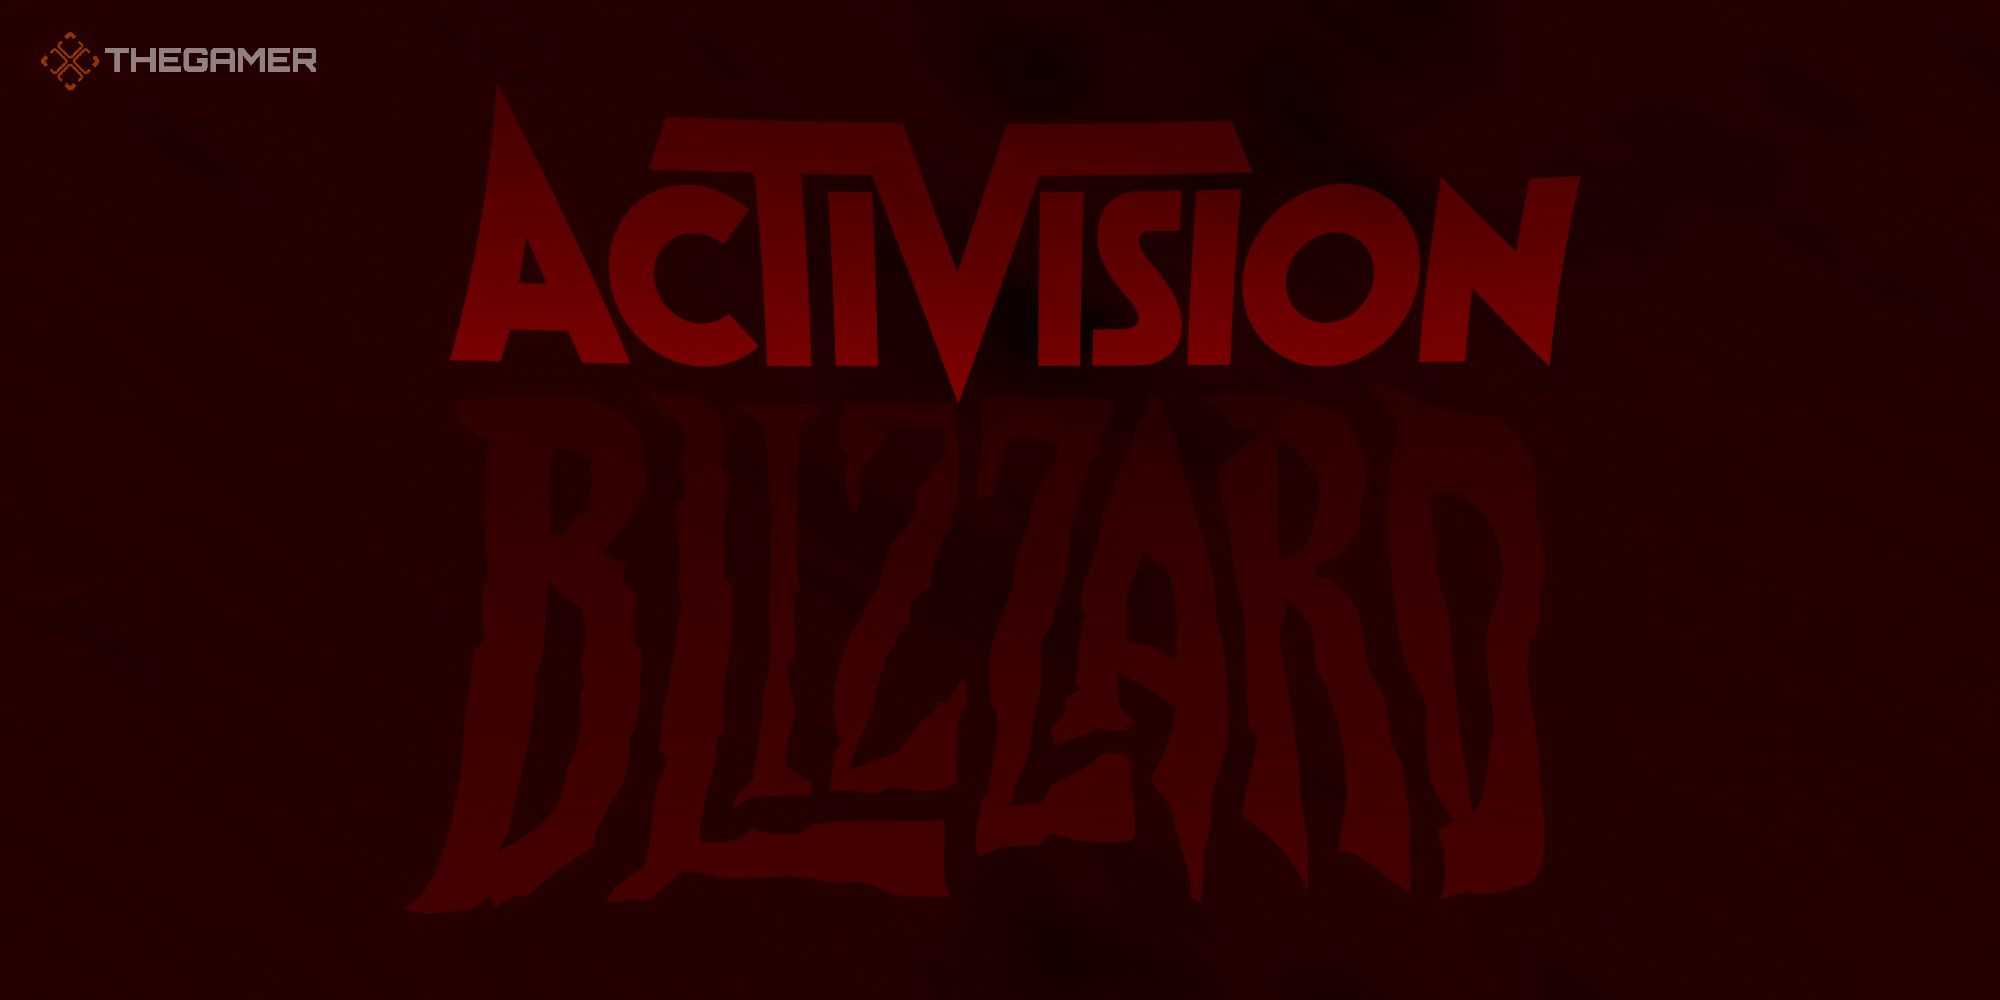 Activision Pays Millions, Still Denies Abuse Claims